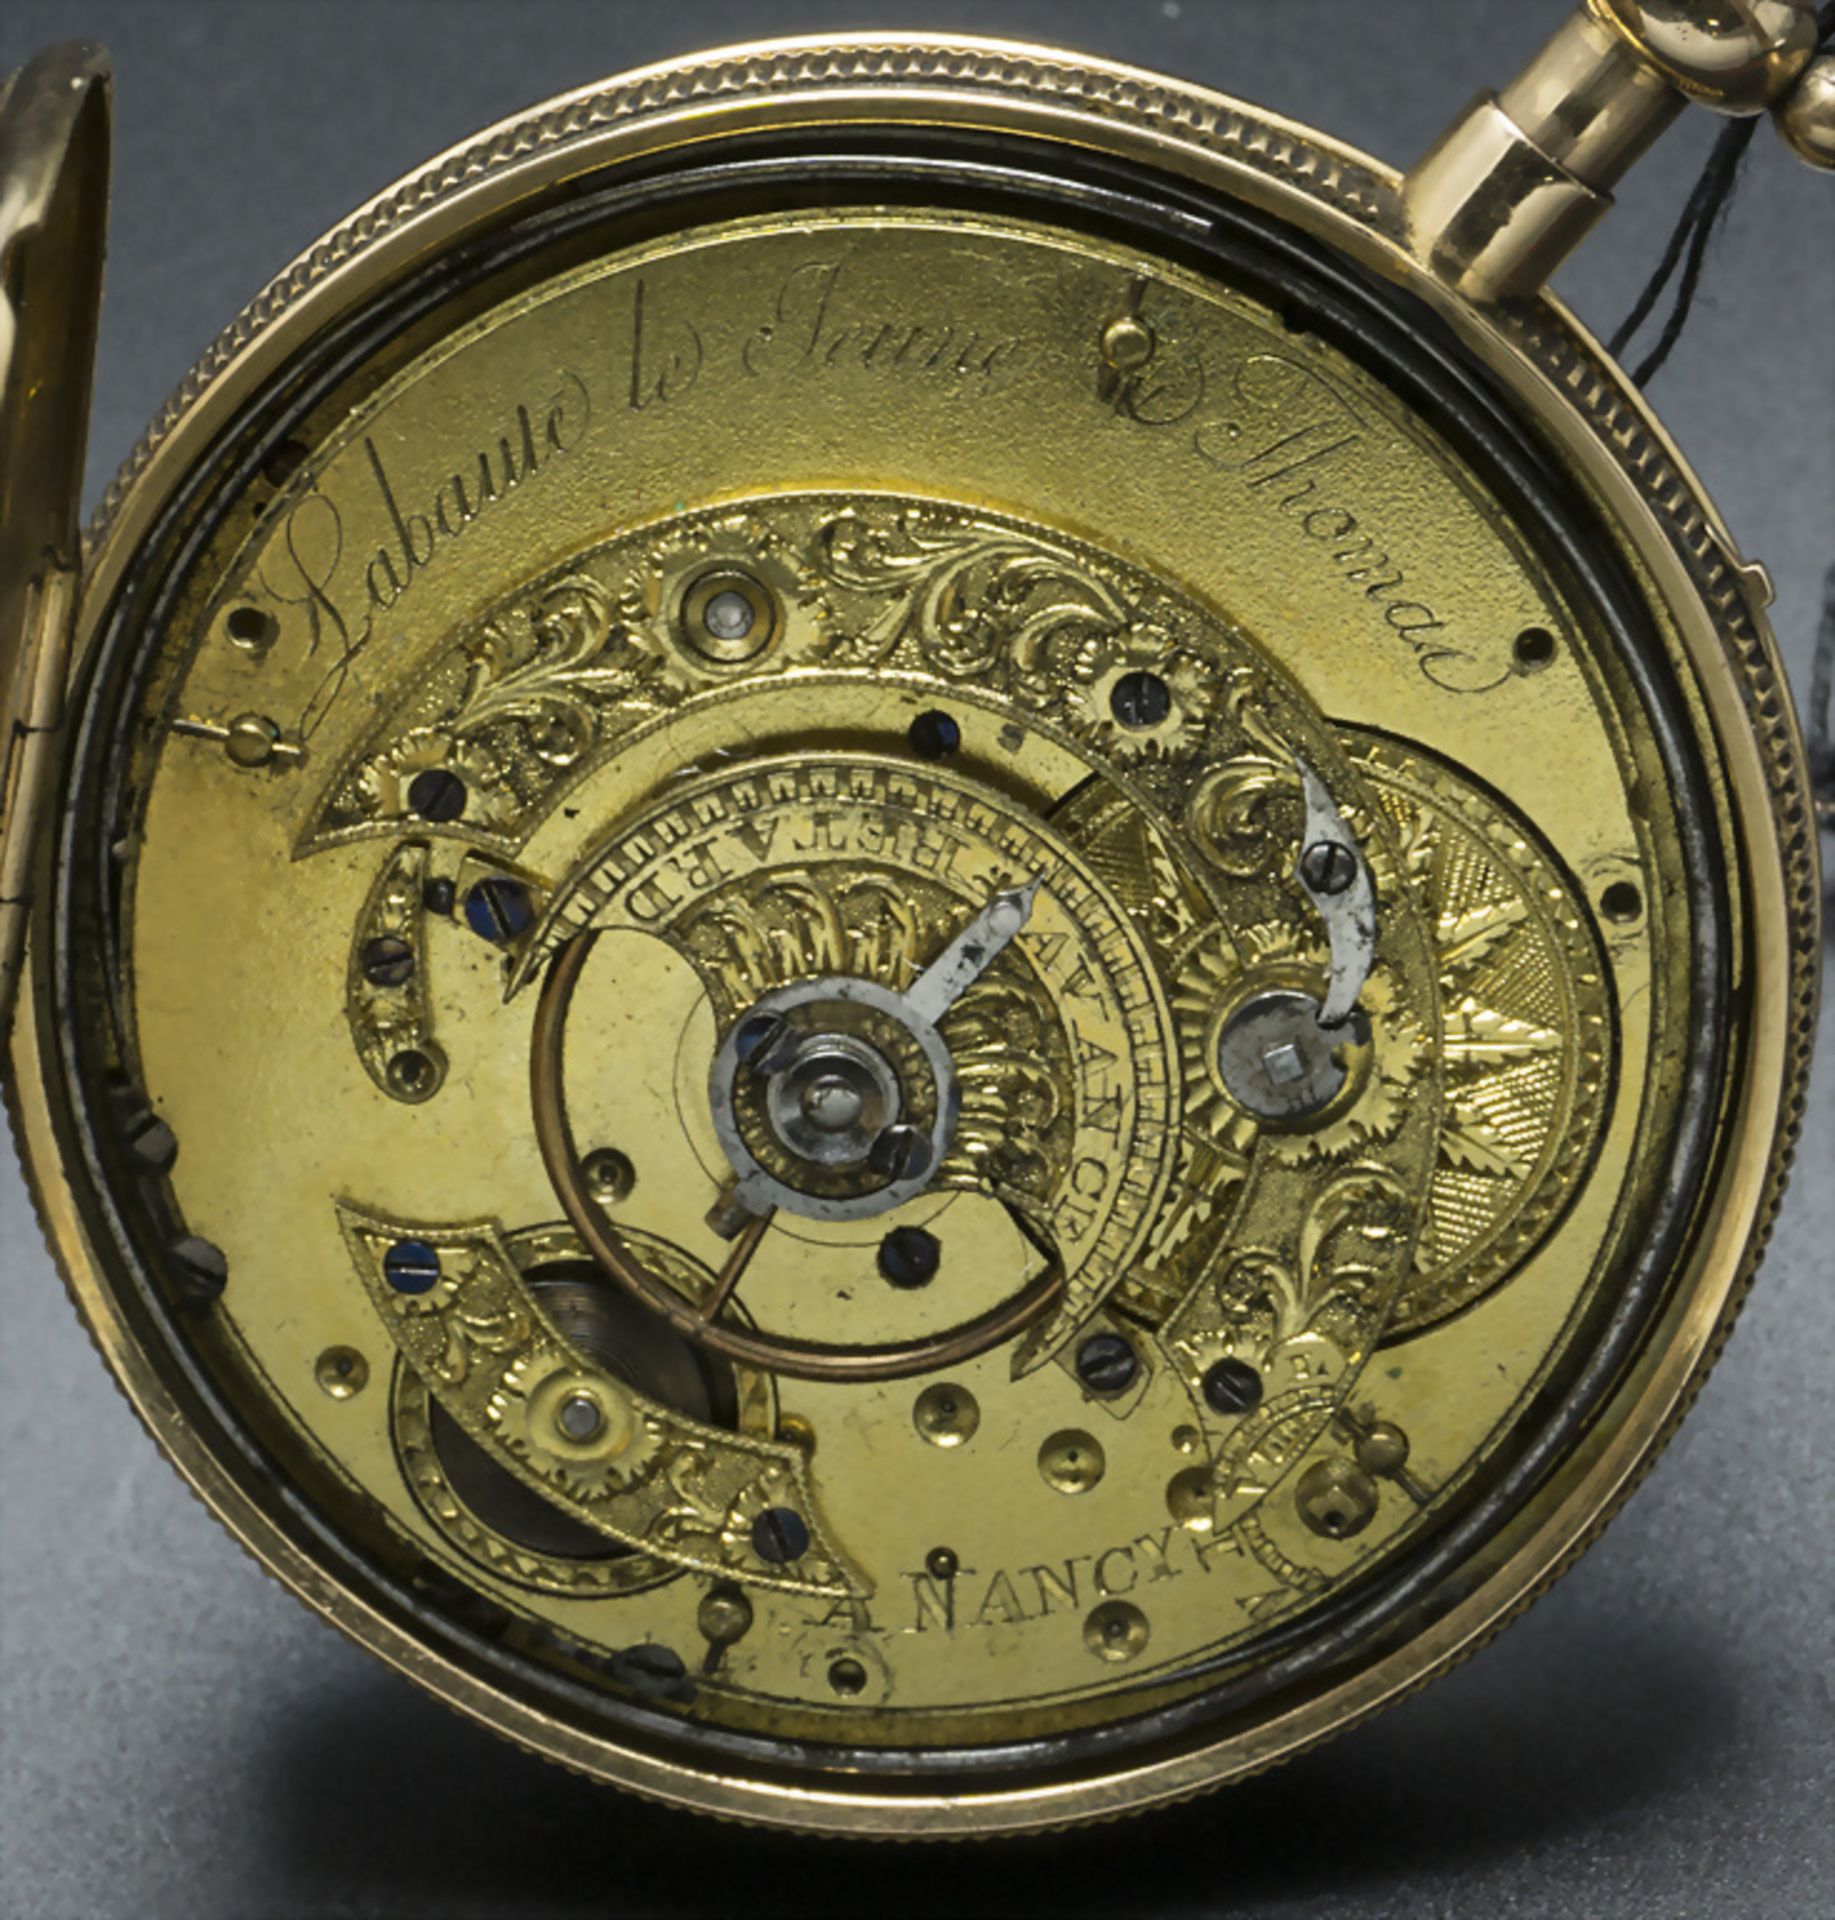 Offene Taschenuhr mit 1/4 Std. Repetition / A 18k gold pocket watch 1/4 quarter repeater, ... - Image 2 of 3